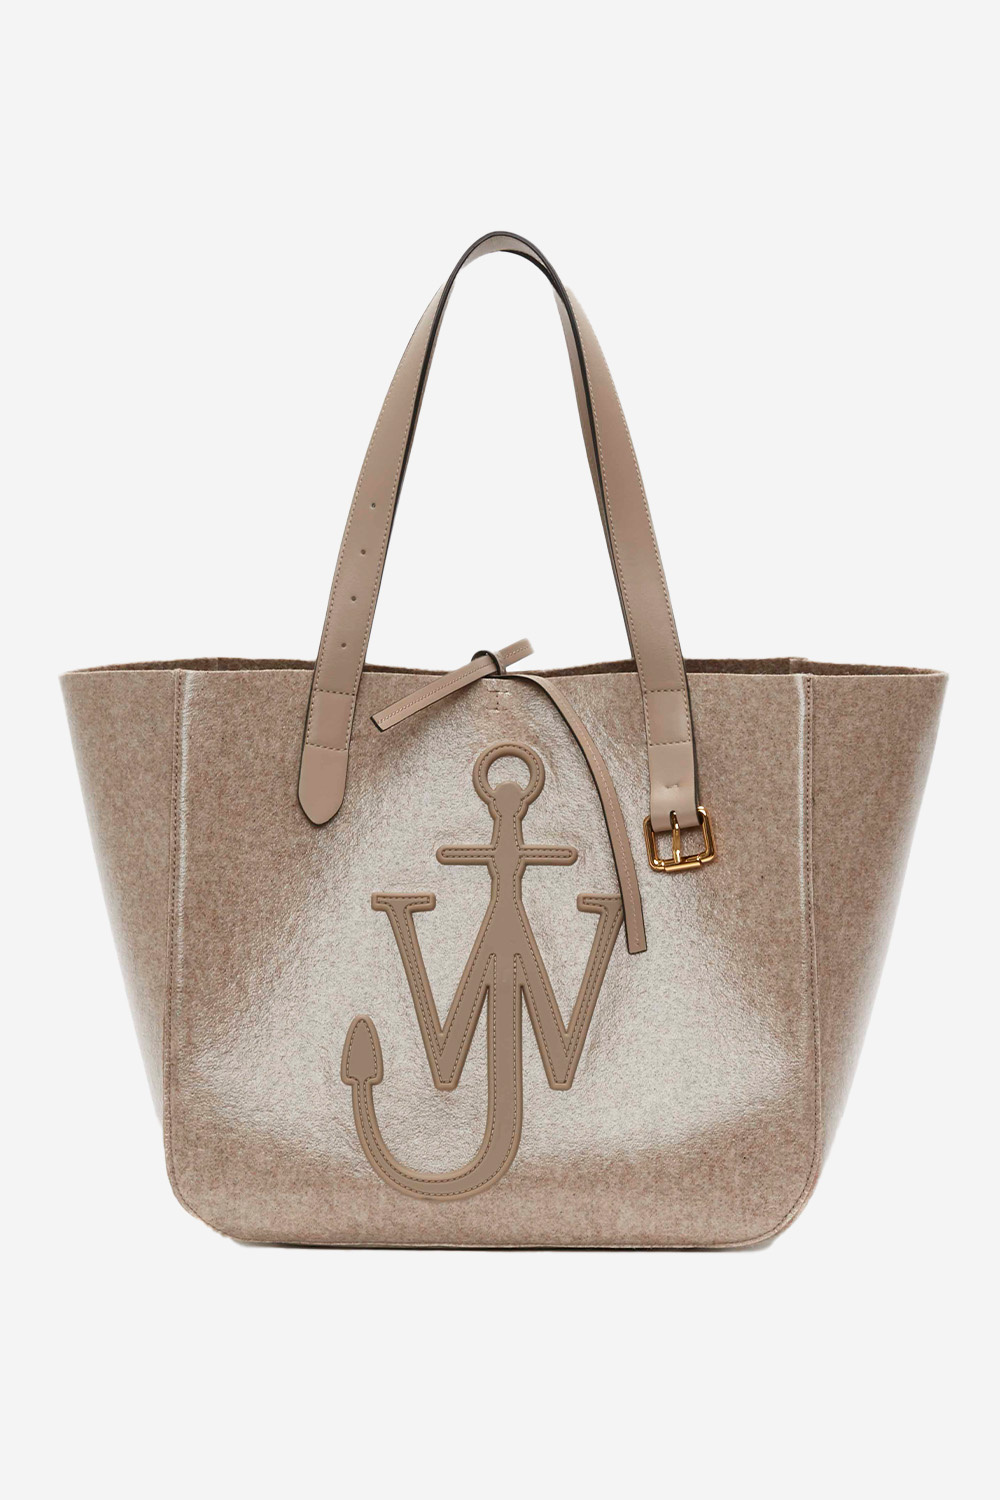 JW Anderson Tote bag Taupe